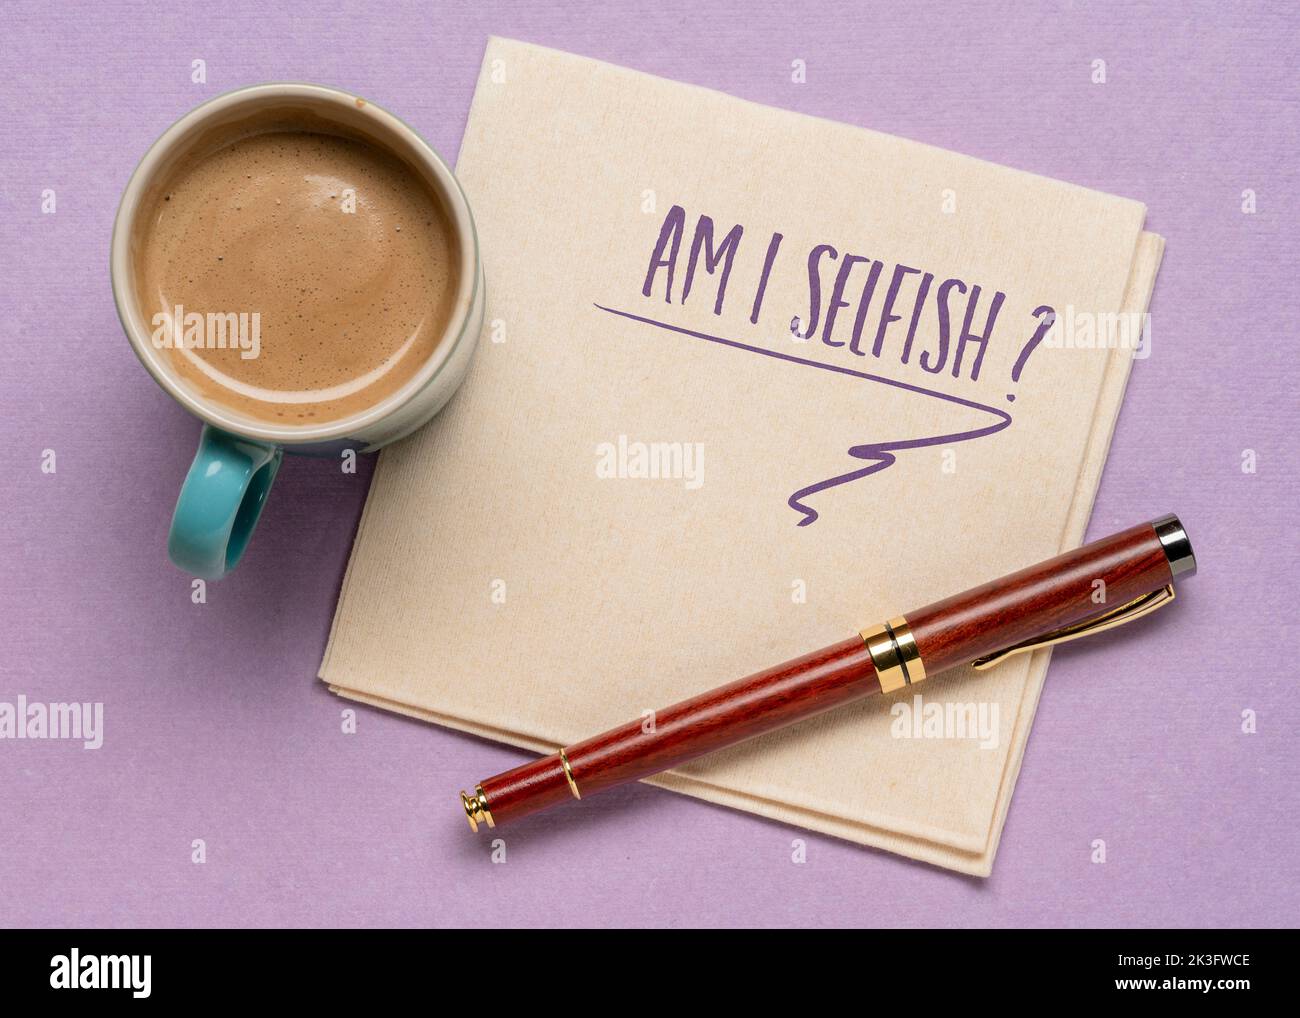 Am I selfish? A question handwritten on a napkin, flat lay with coffee. Concern, self awareness and personal development. Stock Photo